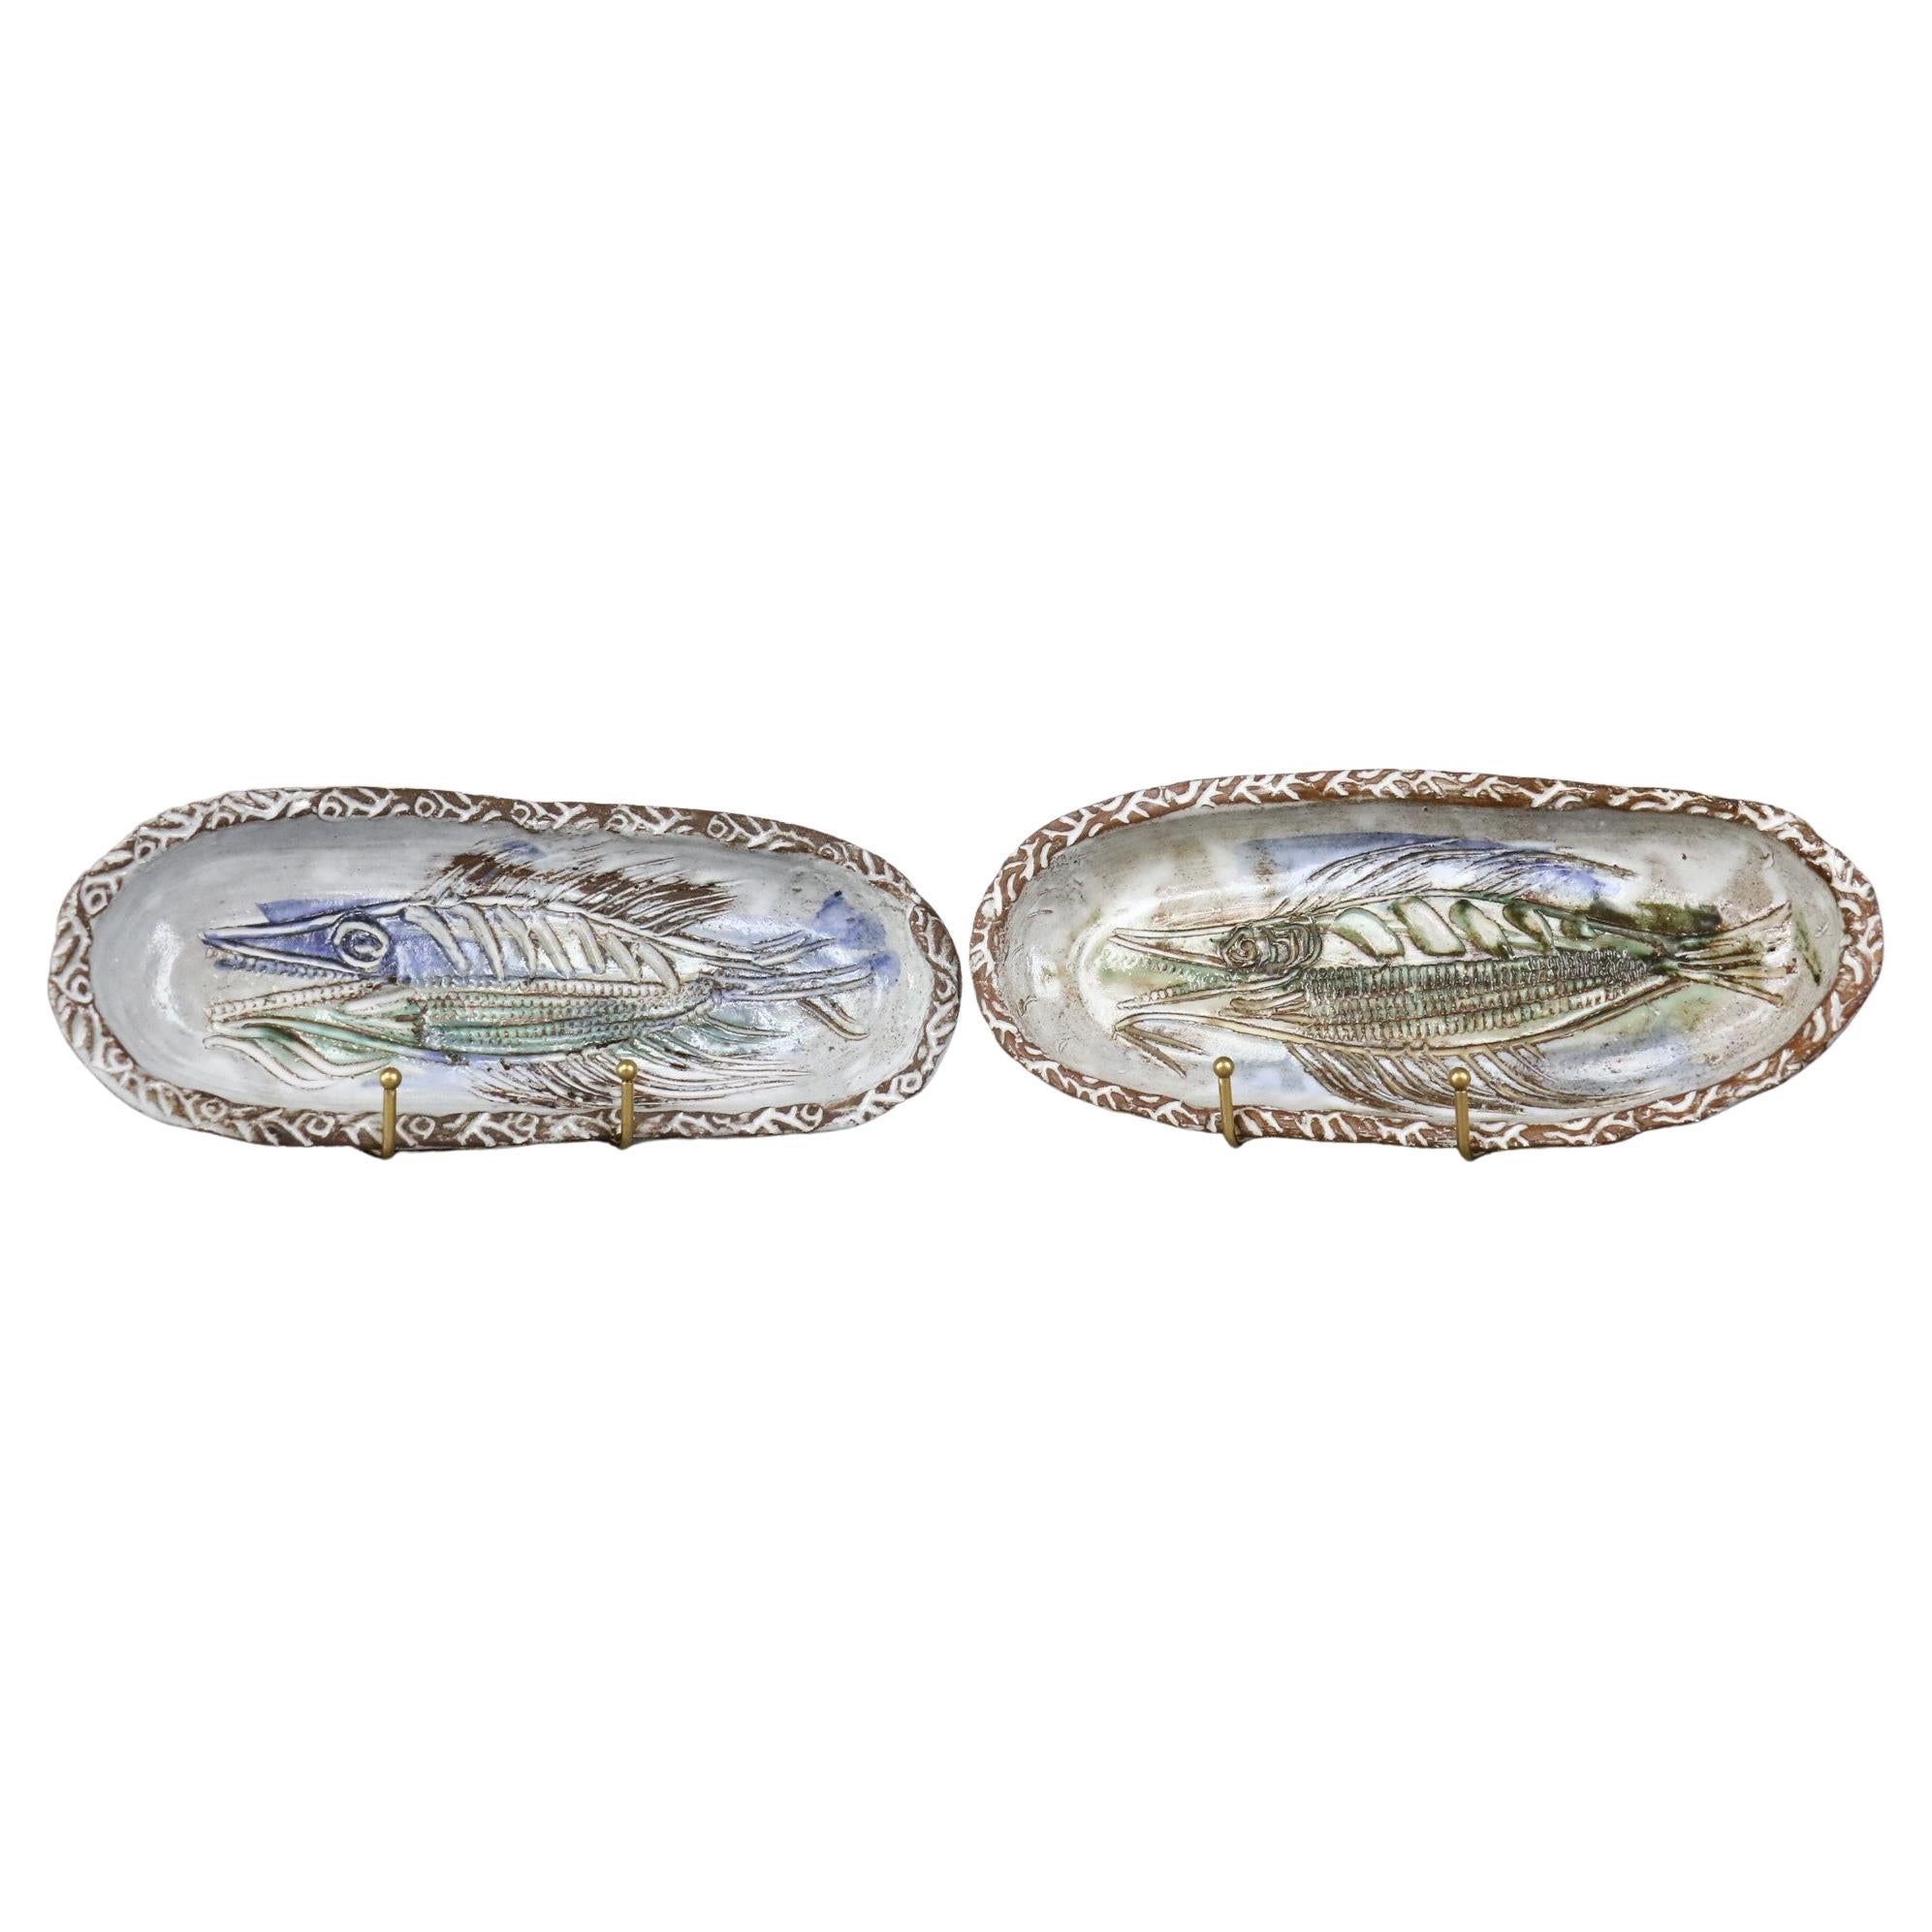 Pair of Mid-Century Modern French Ceramic decorative trays Albert Thiry, 1960s

Very nice set of two decorative ceramic trays decorated with fish. The chalk white enamel is of very good quality. It brings out the motifs engraved by the